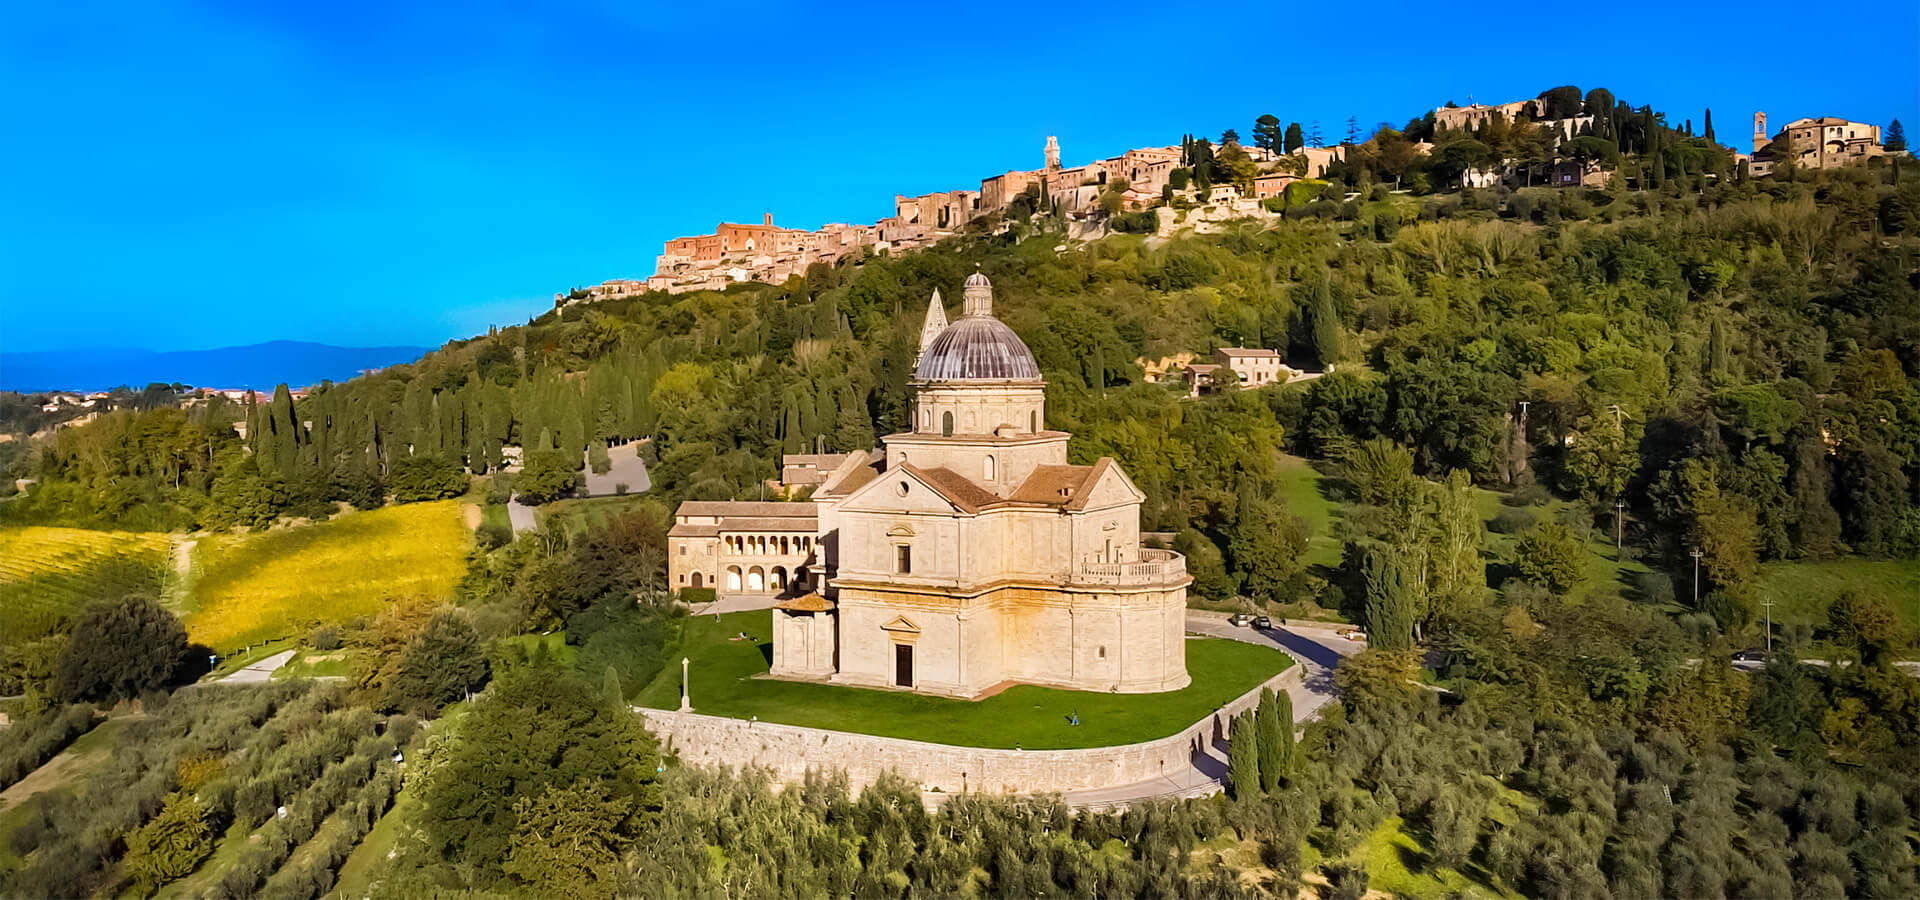 Montepulciano Tuscany Wine Tour from Rome Chauffeur wine tasting tours